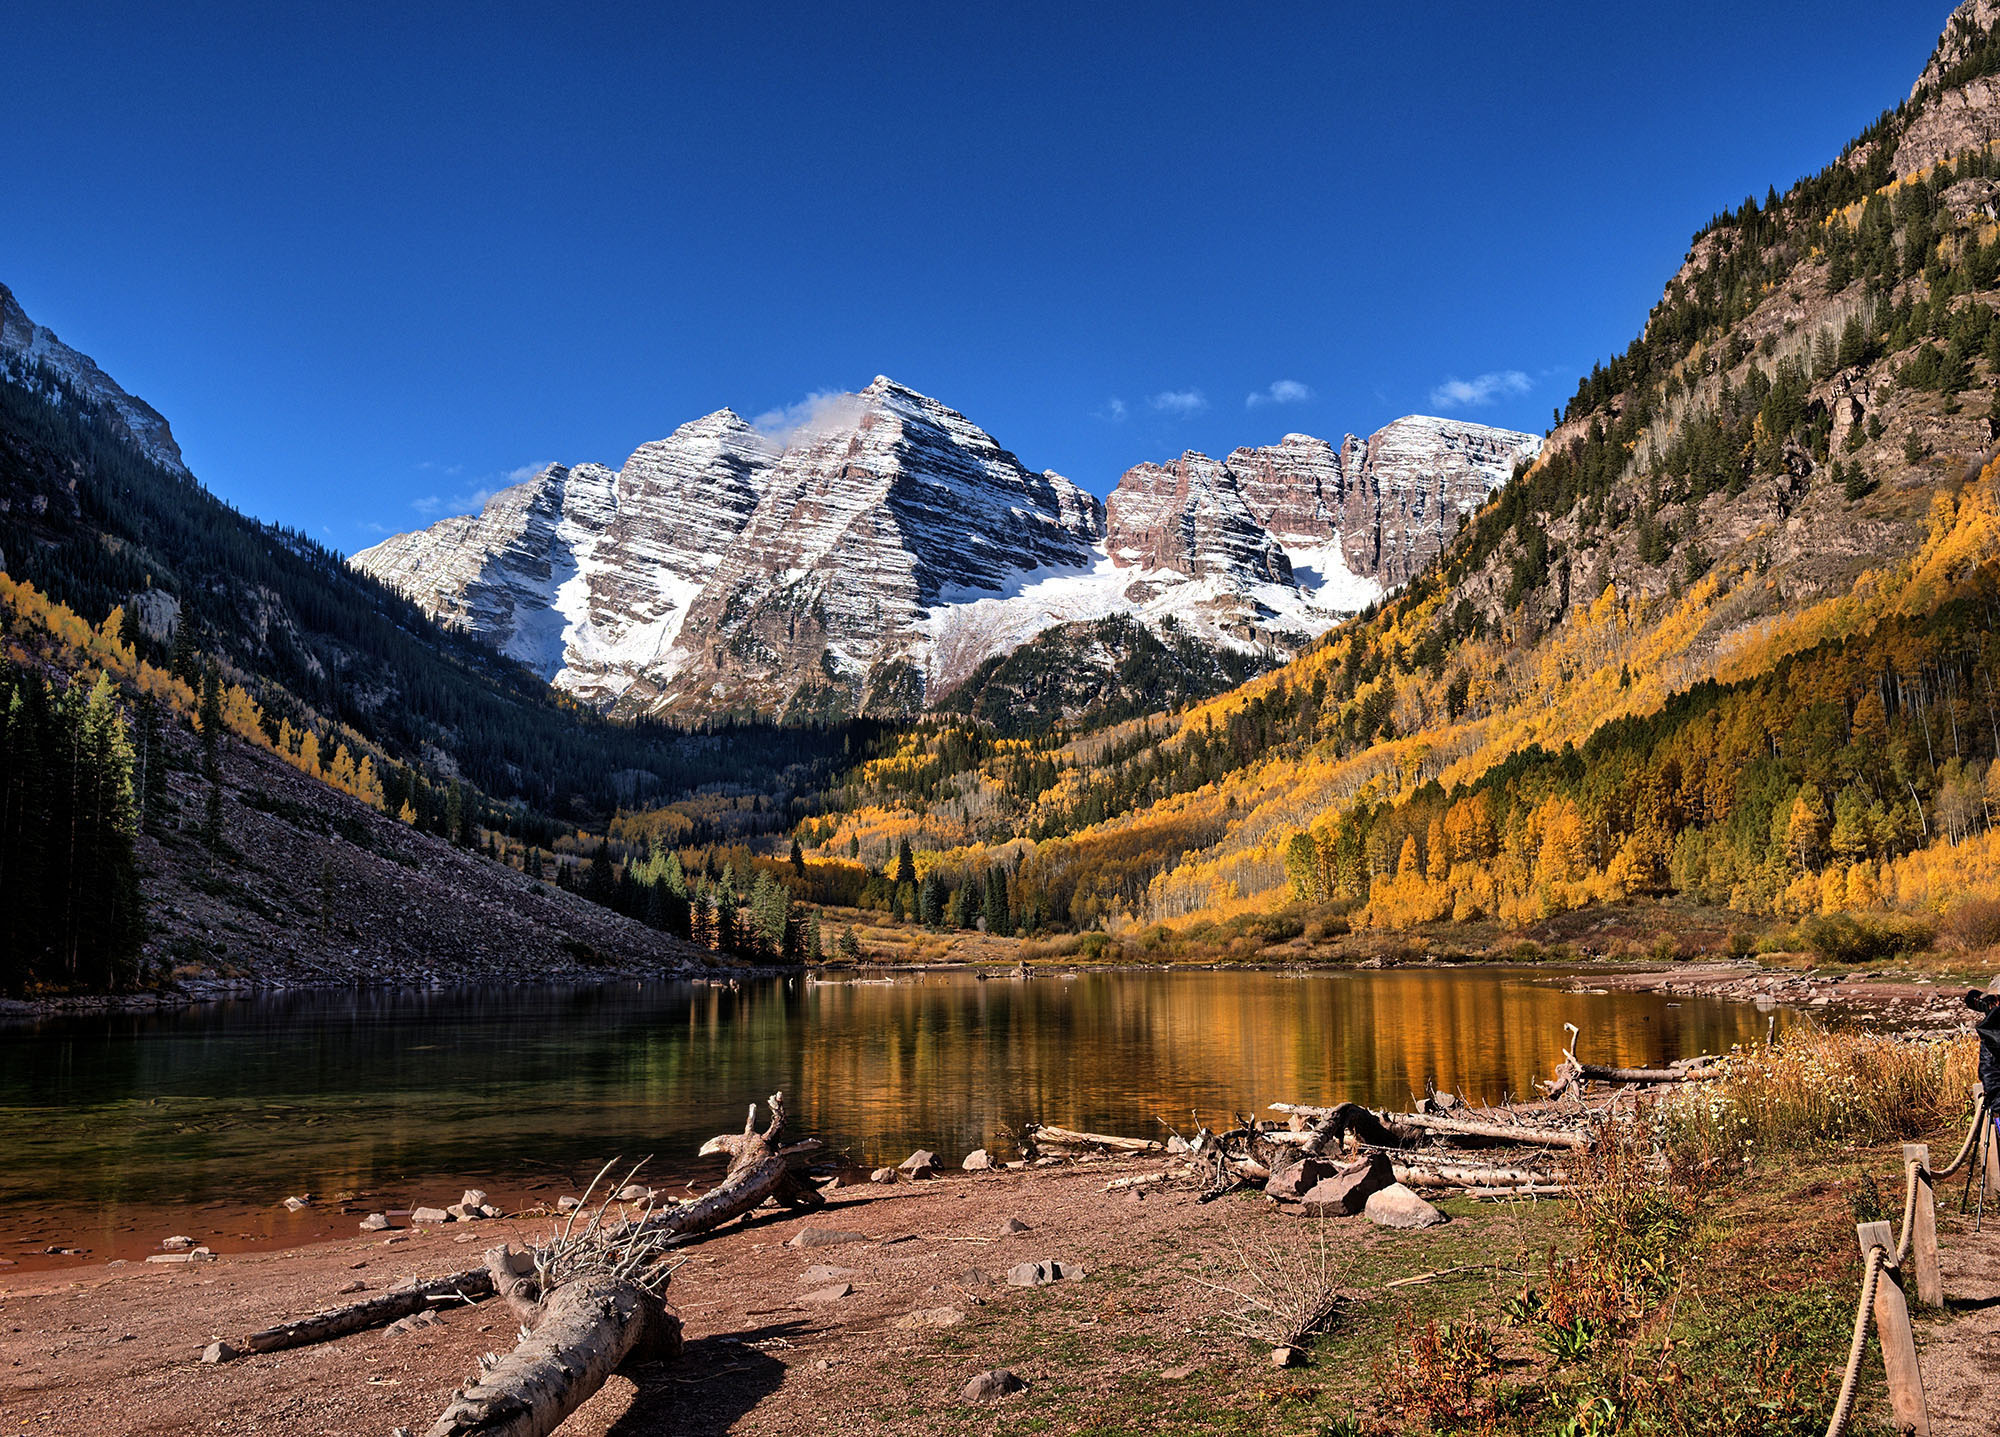 The Maroon Bells in the Aspen area above Maroon Lake are formed by Maroon Peak and North Maroon Peak over 14,000 feet high.  They are topped by layers of oxidized hematite-rich shale that formed during the Permian and Pennsylvanian periods (252-320 Ma) that was raised during the collision of Africa and North America to form Pangea and tilted during the Laramide orogeny (72-40 Ma).